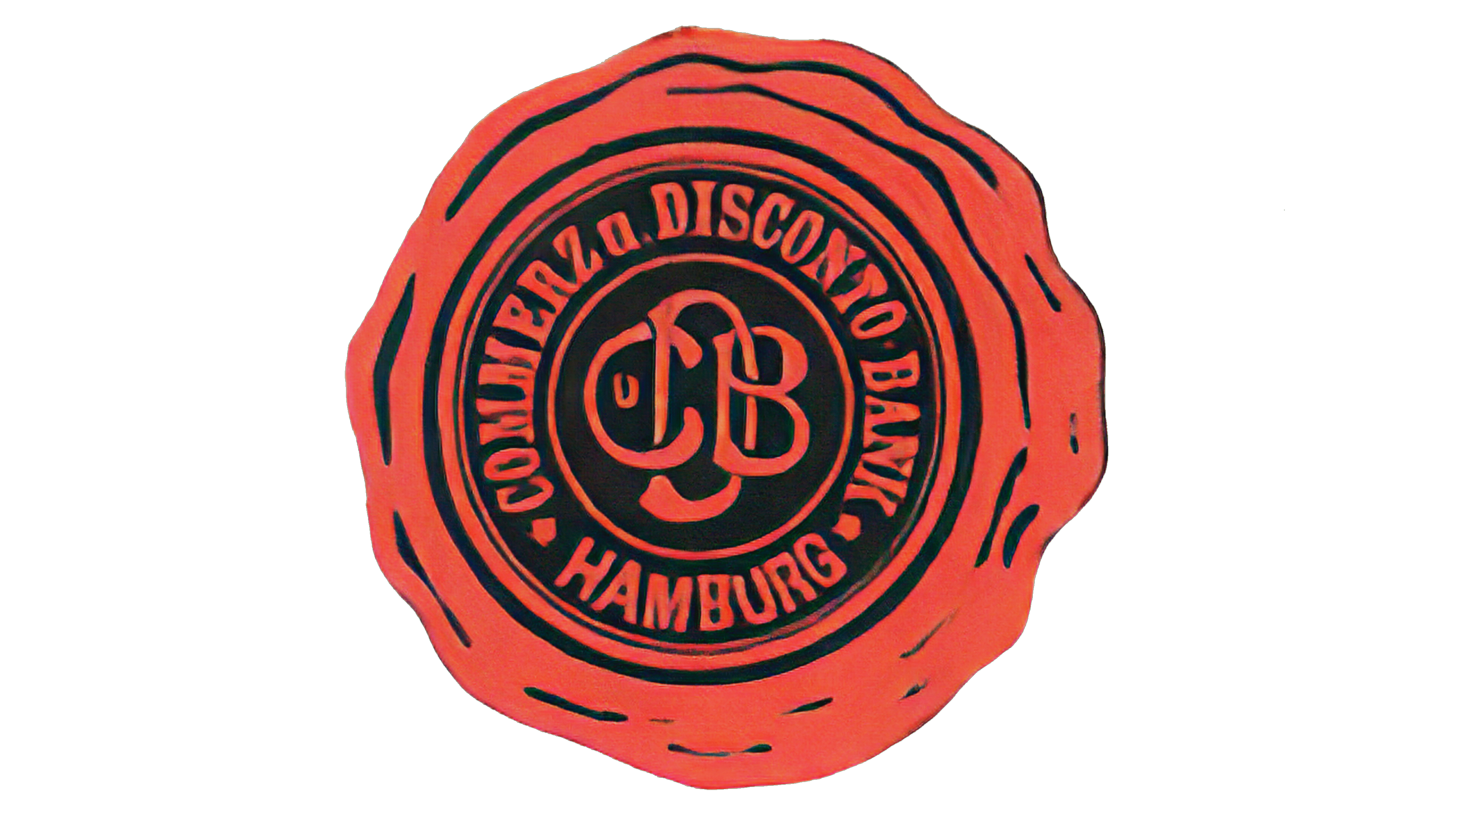 Commerz disconto bank sign before 1920